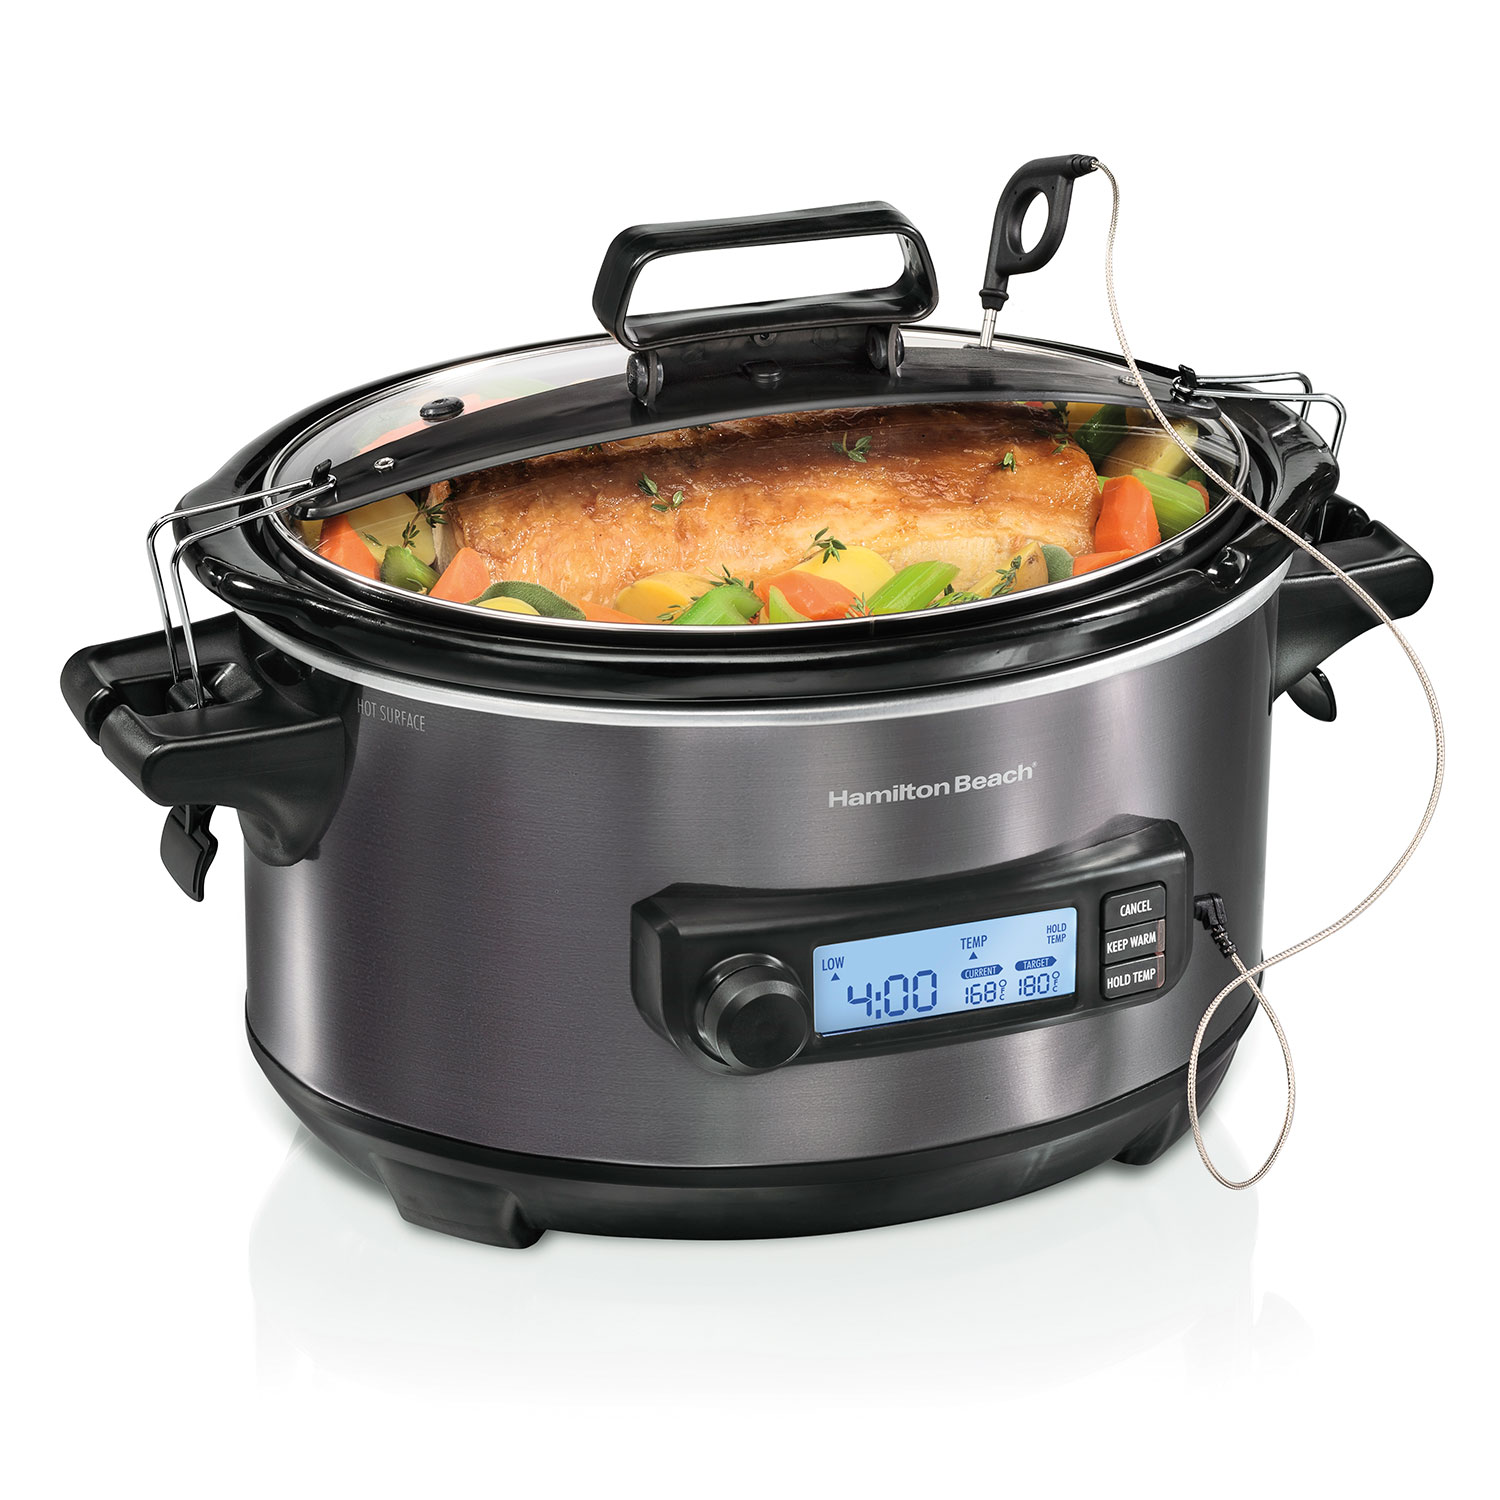 What Is The Temperature Of A Slow Cooker On High